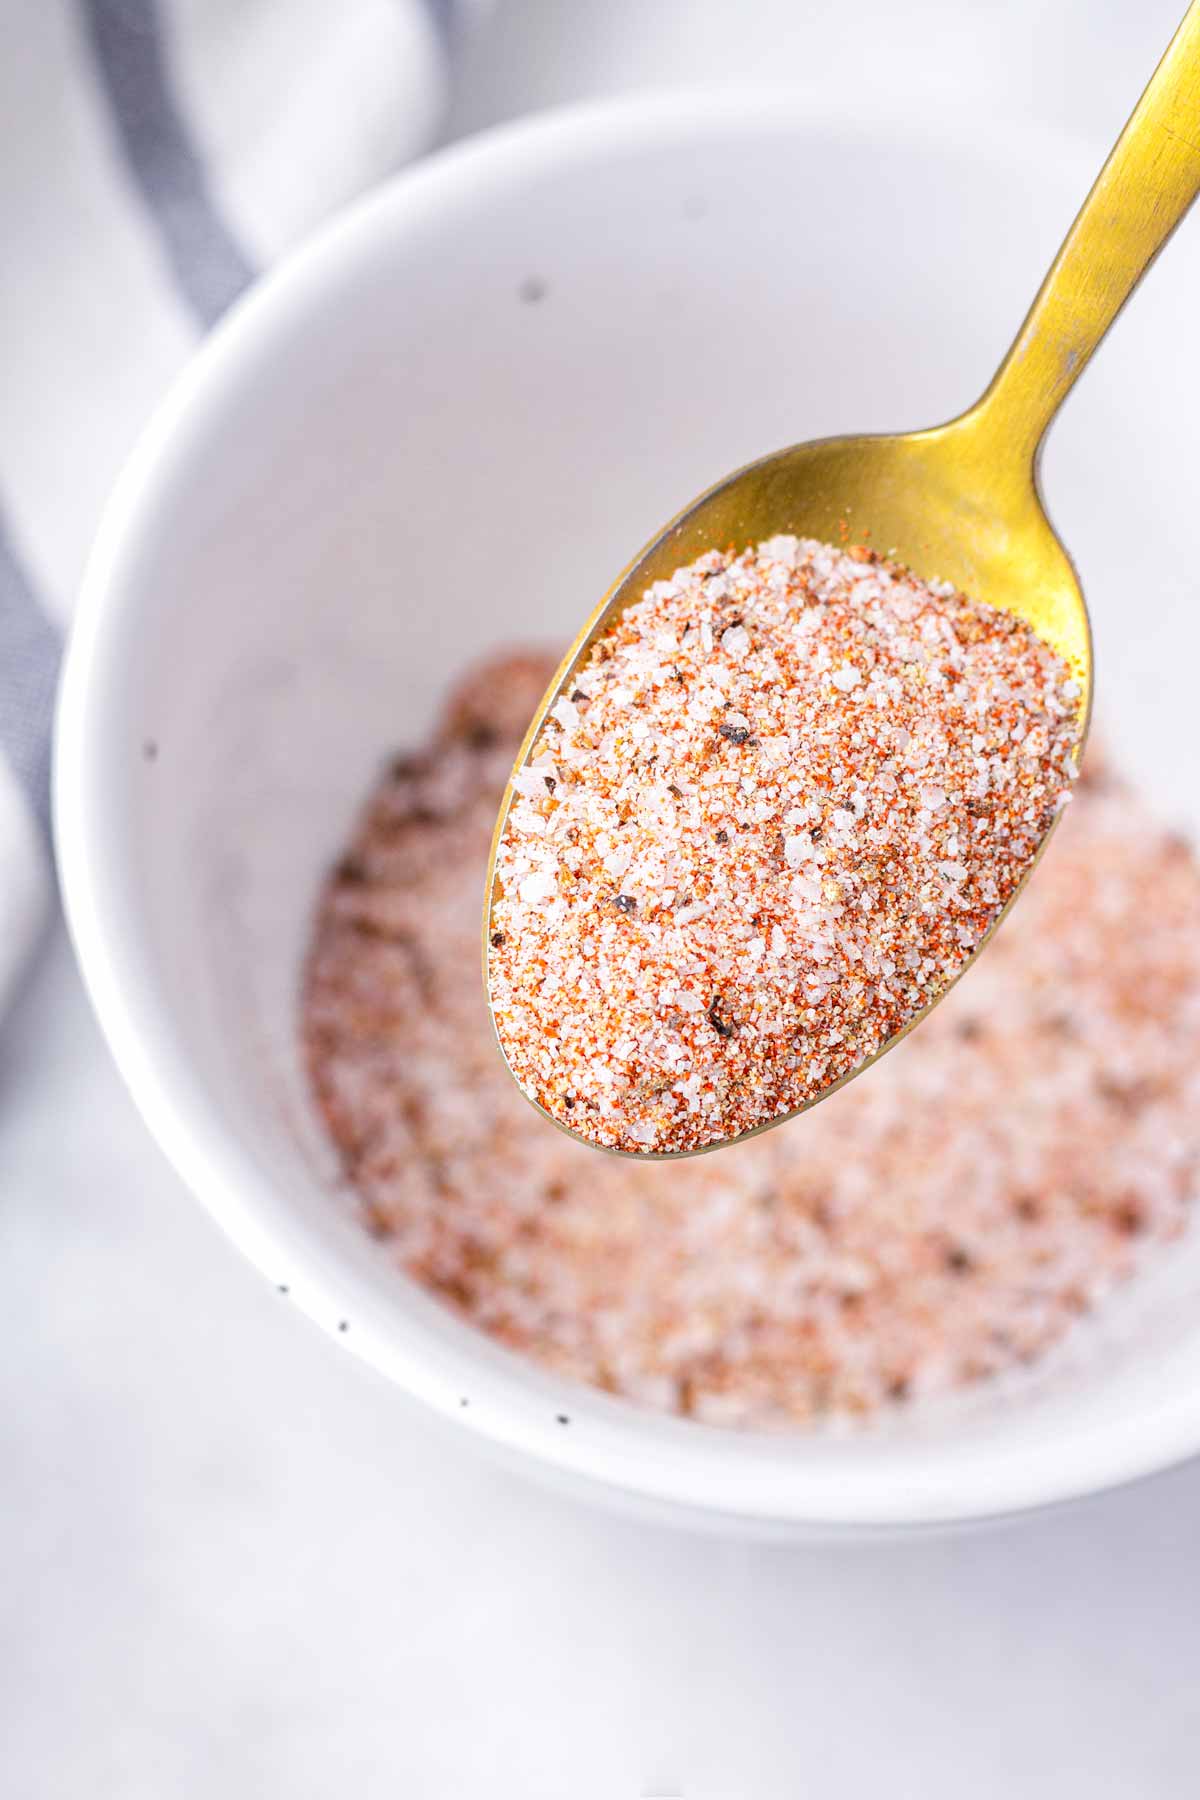 a spoonful of burger seasoning blend made with spices